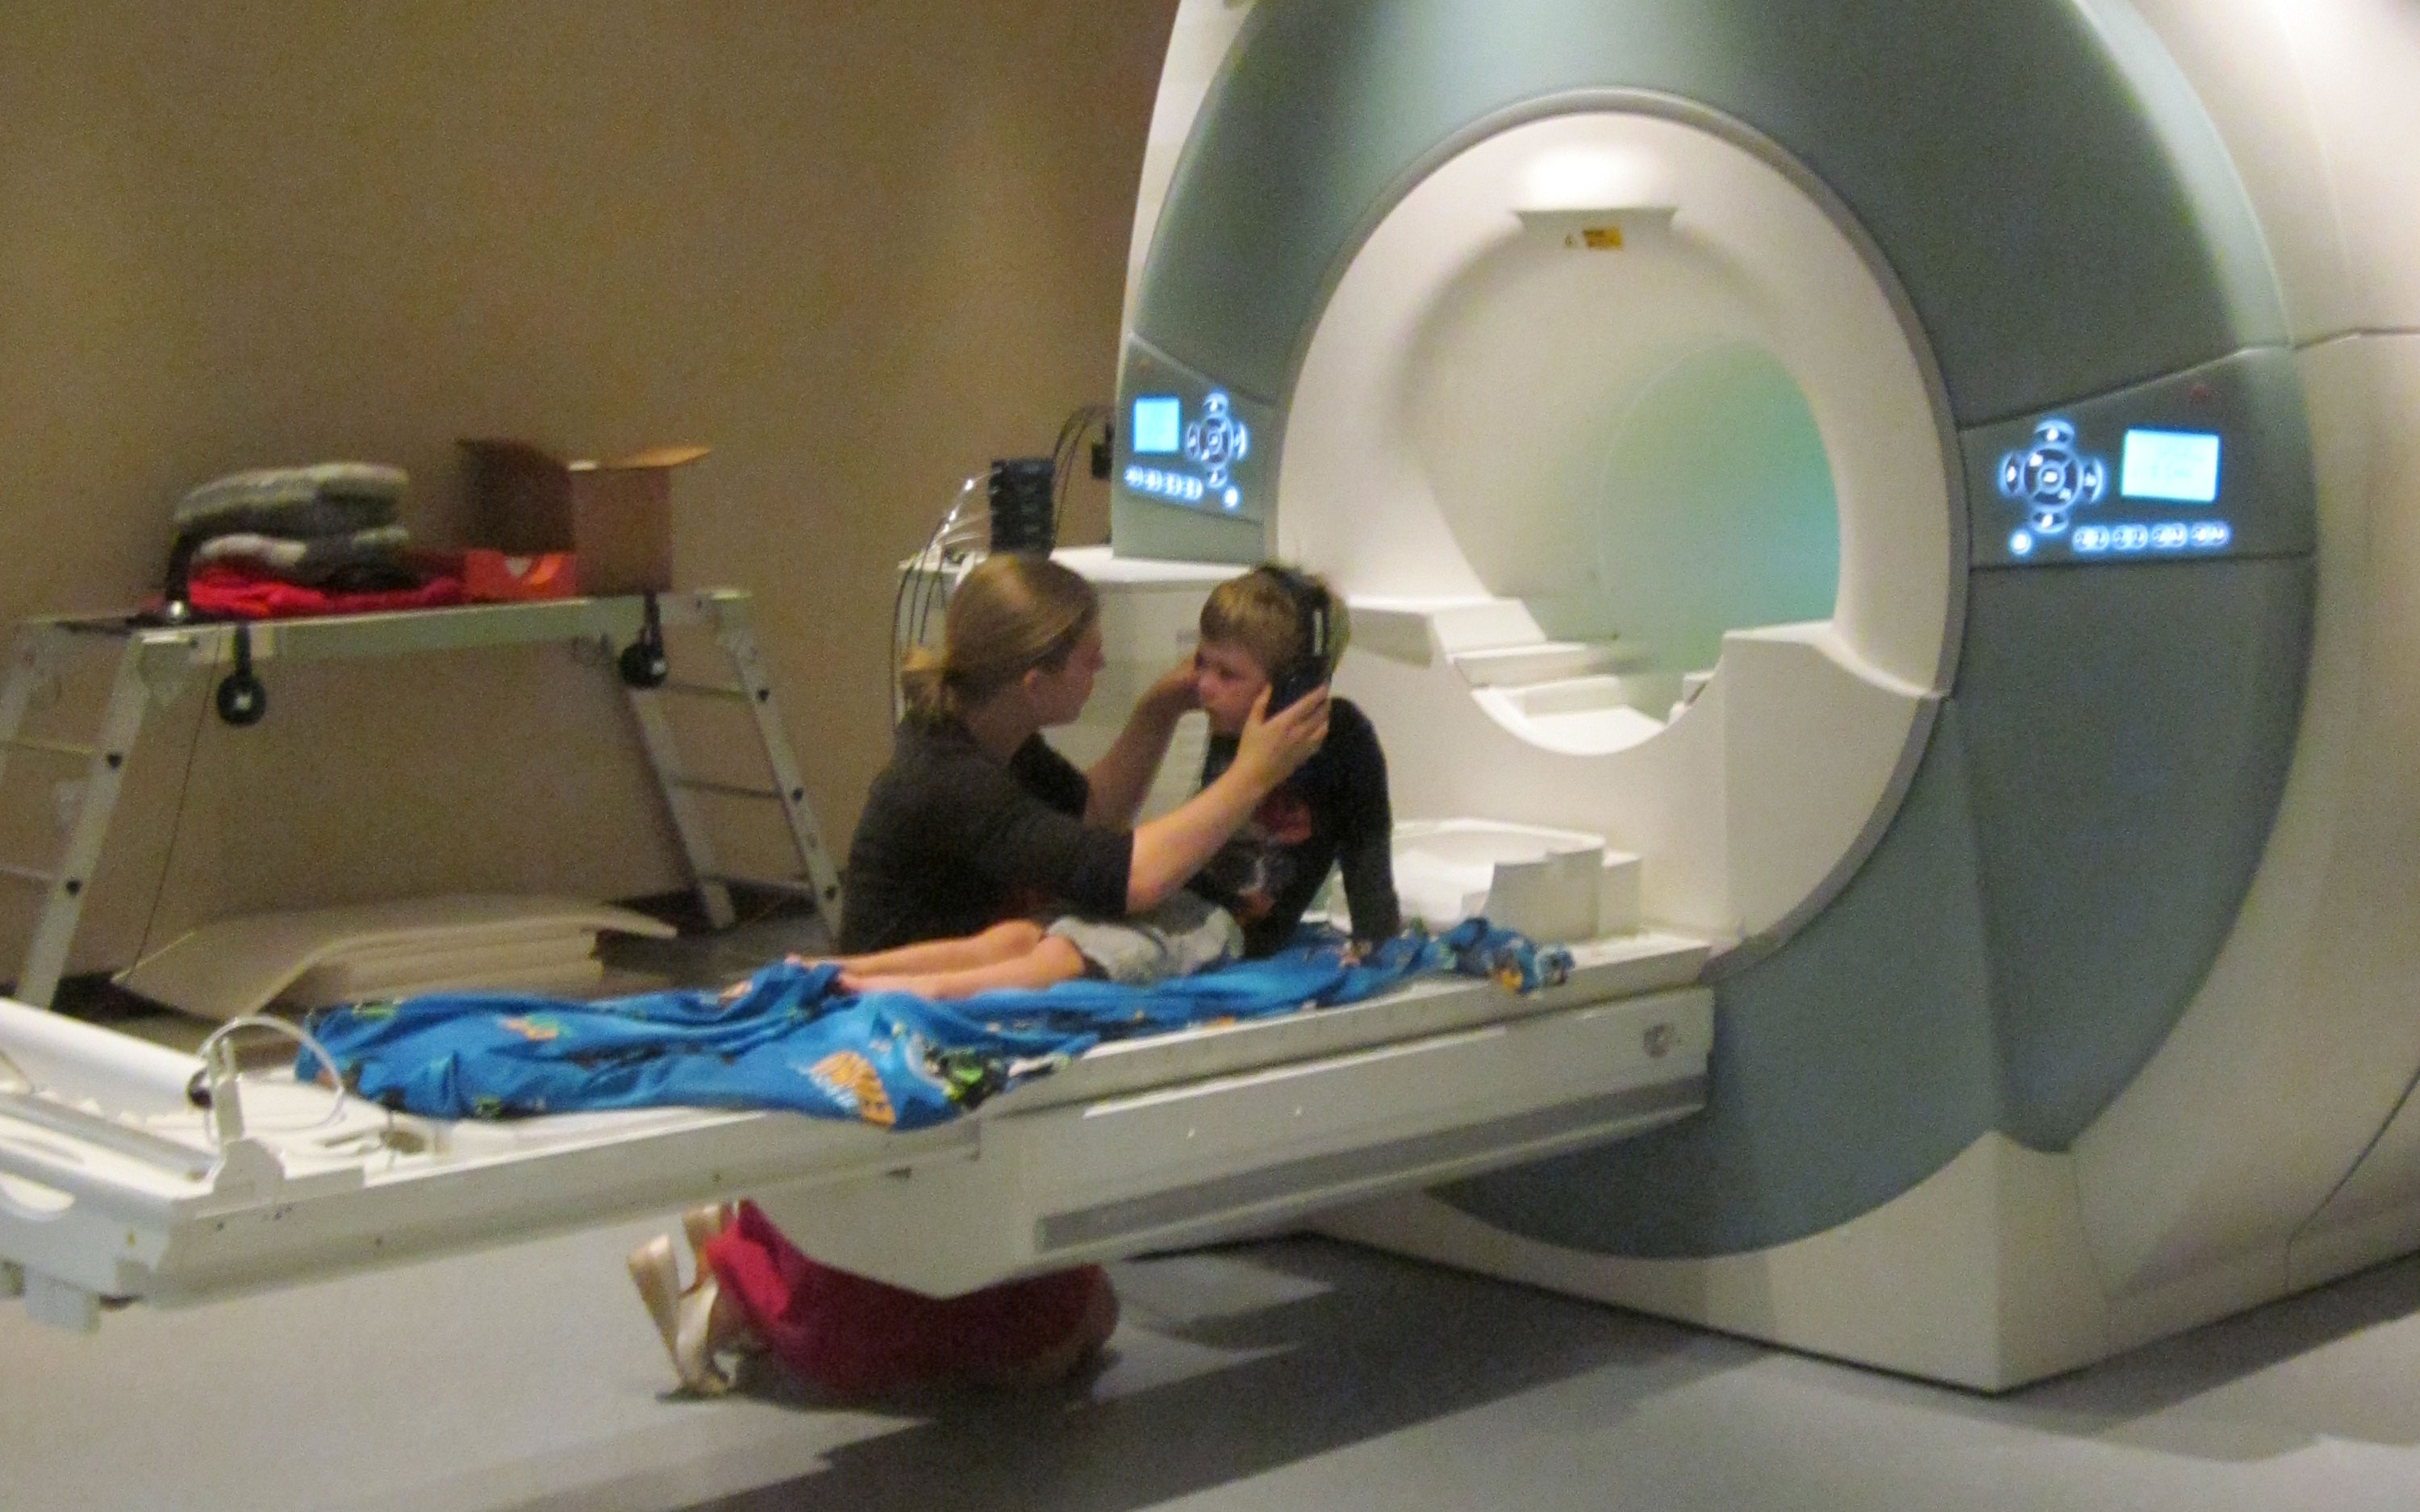 An MRI scan working with a subject who is a child